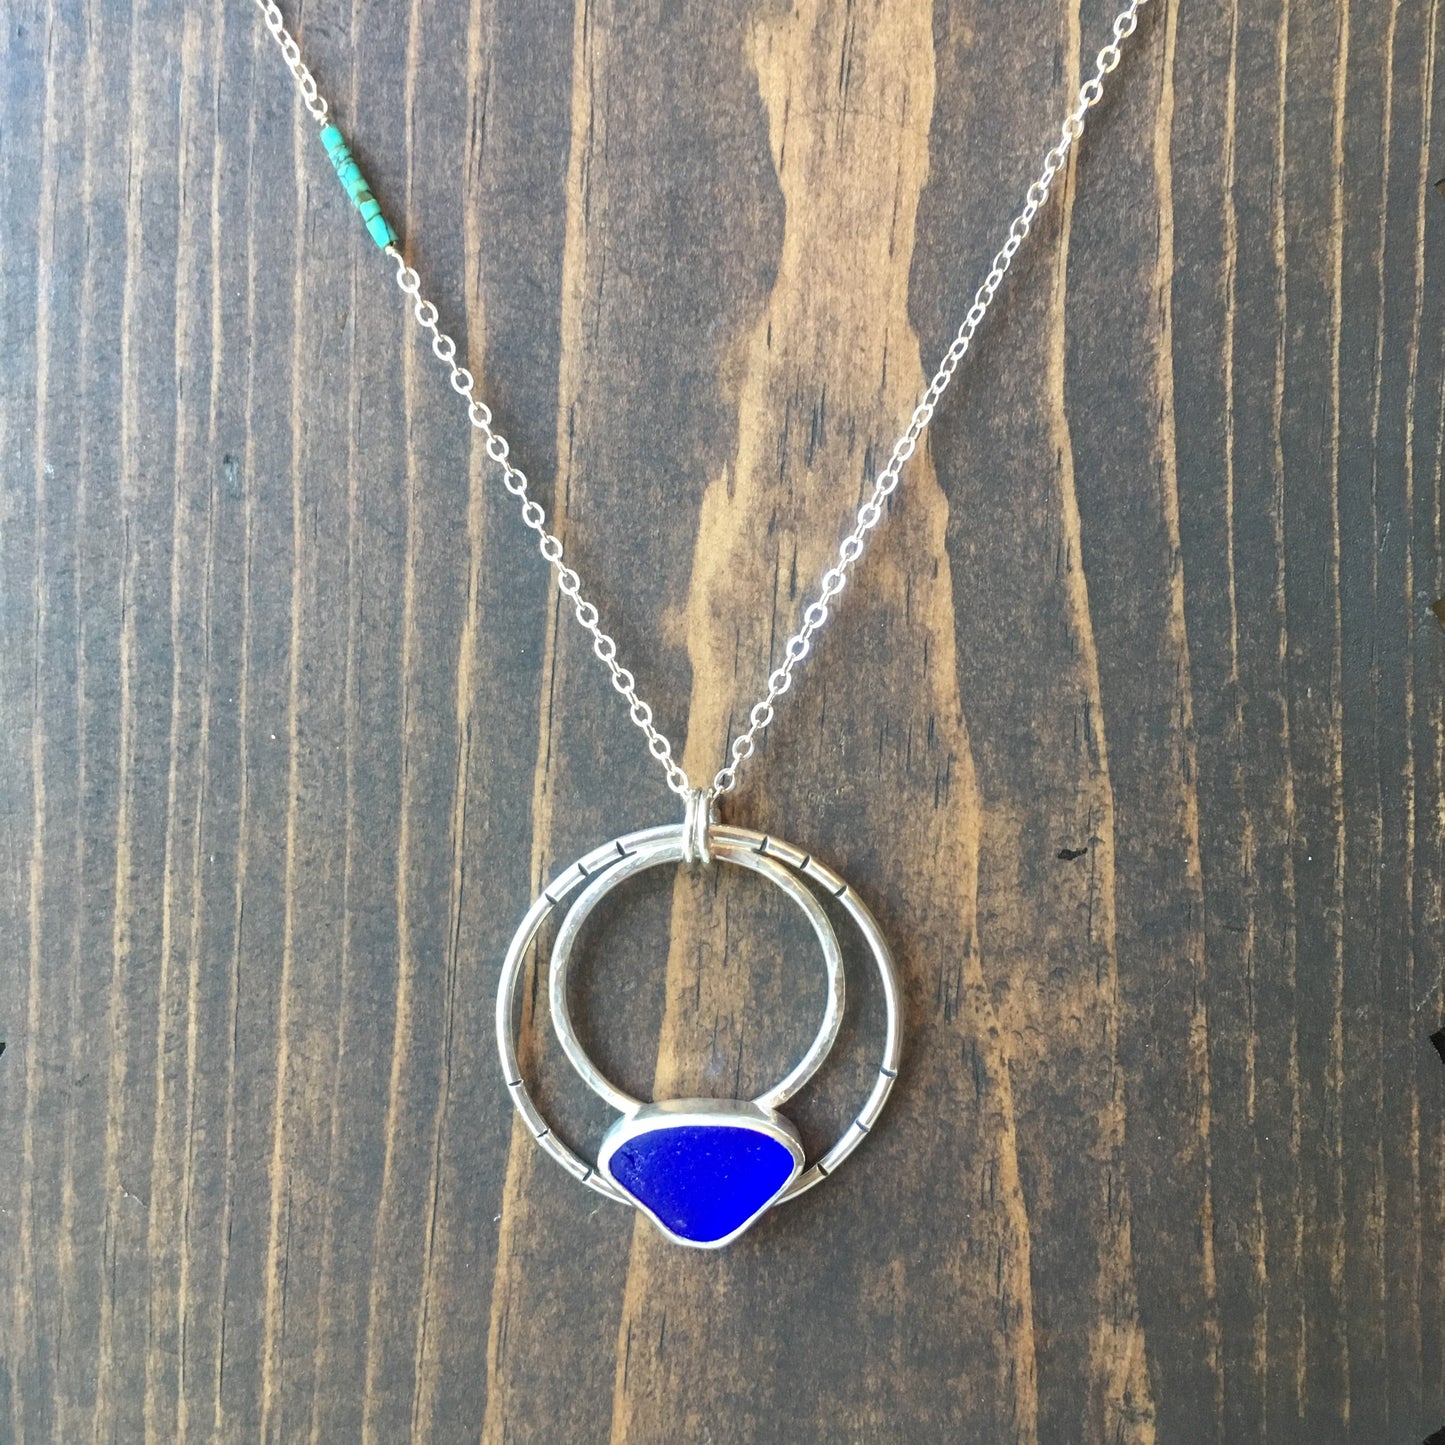 Moonlight Pendant with Rare Cobalt Blue Seaglass and Genuine Turquoise Beads